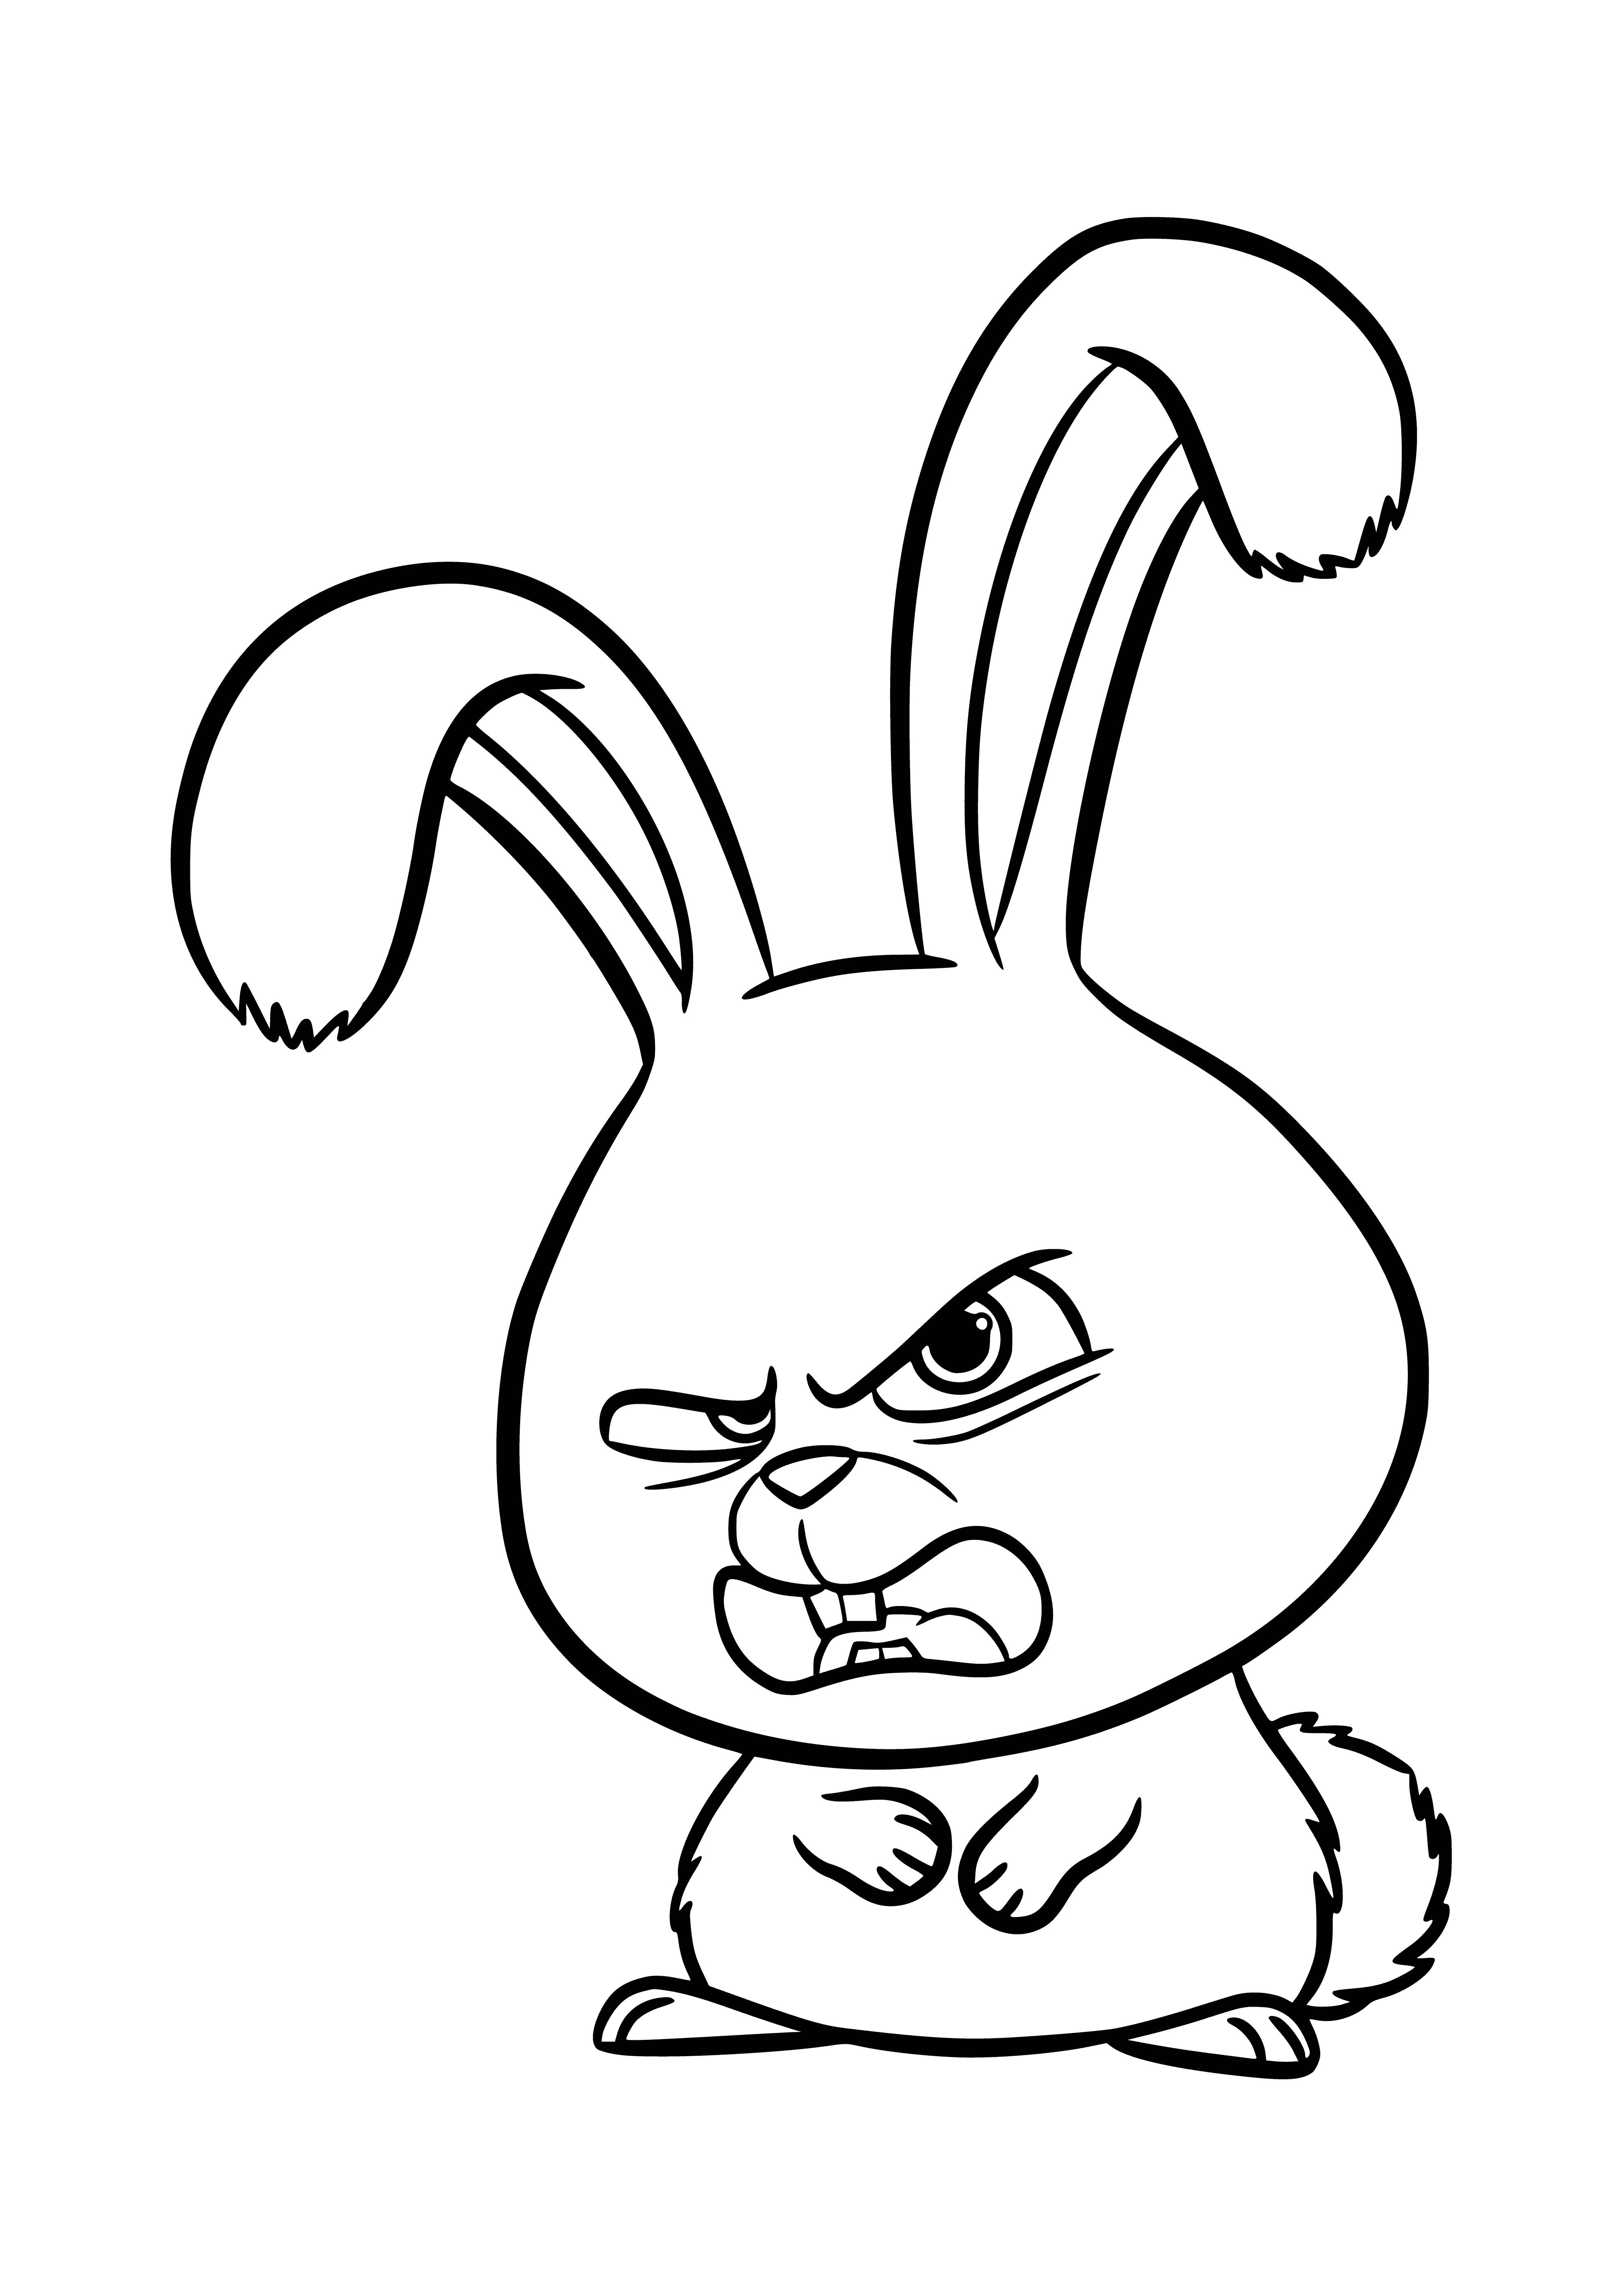 Leader of the Beast Underground - Rabbit Snowball coloring page